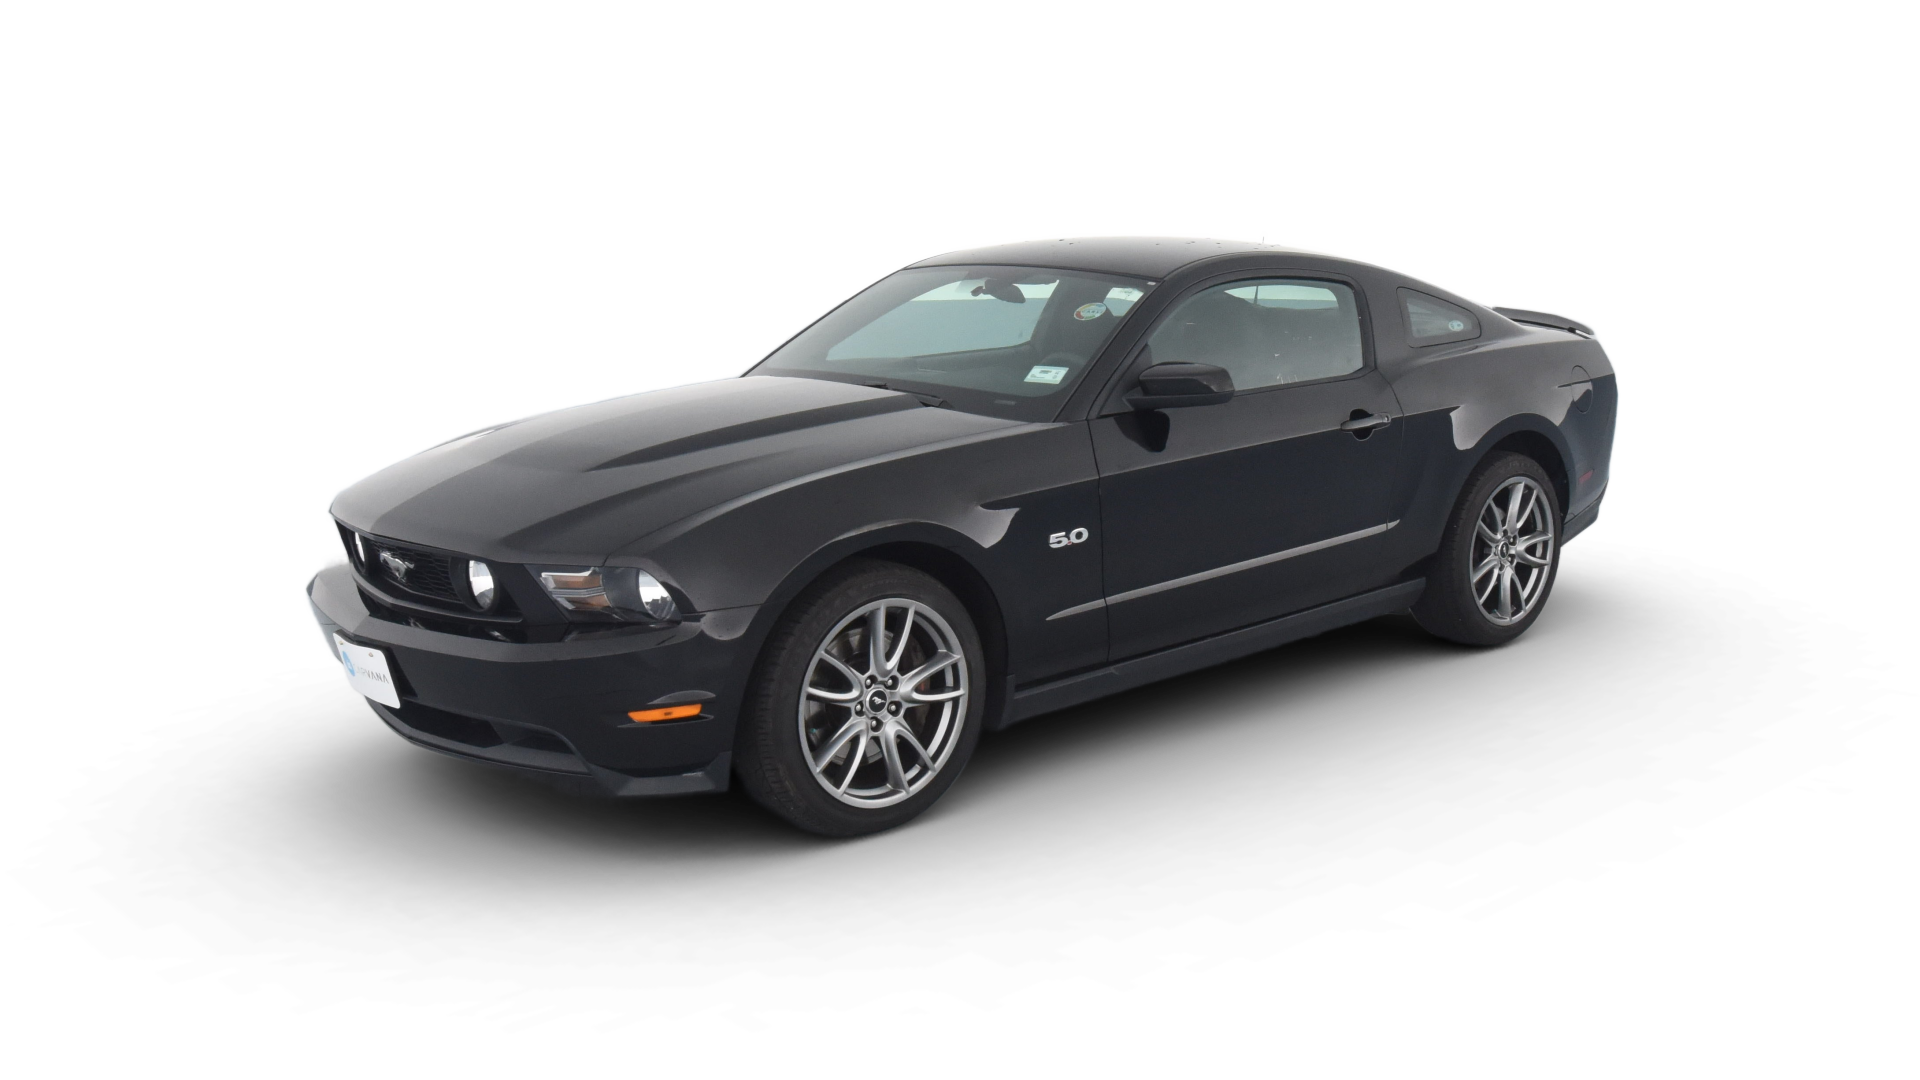 Used 2011 Ford Mustang For Sale Online | Carvana